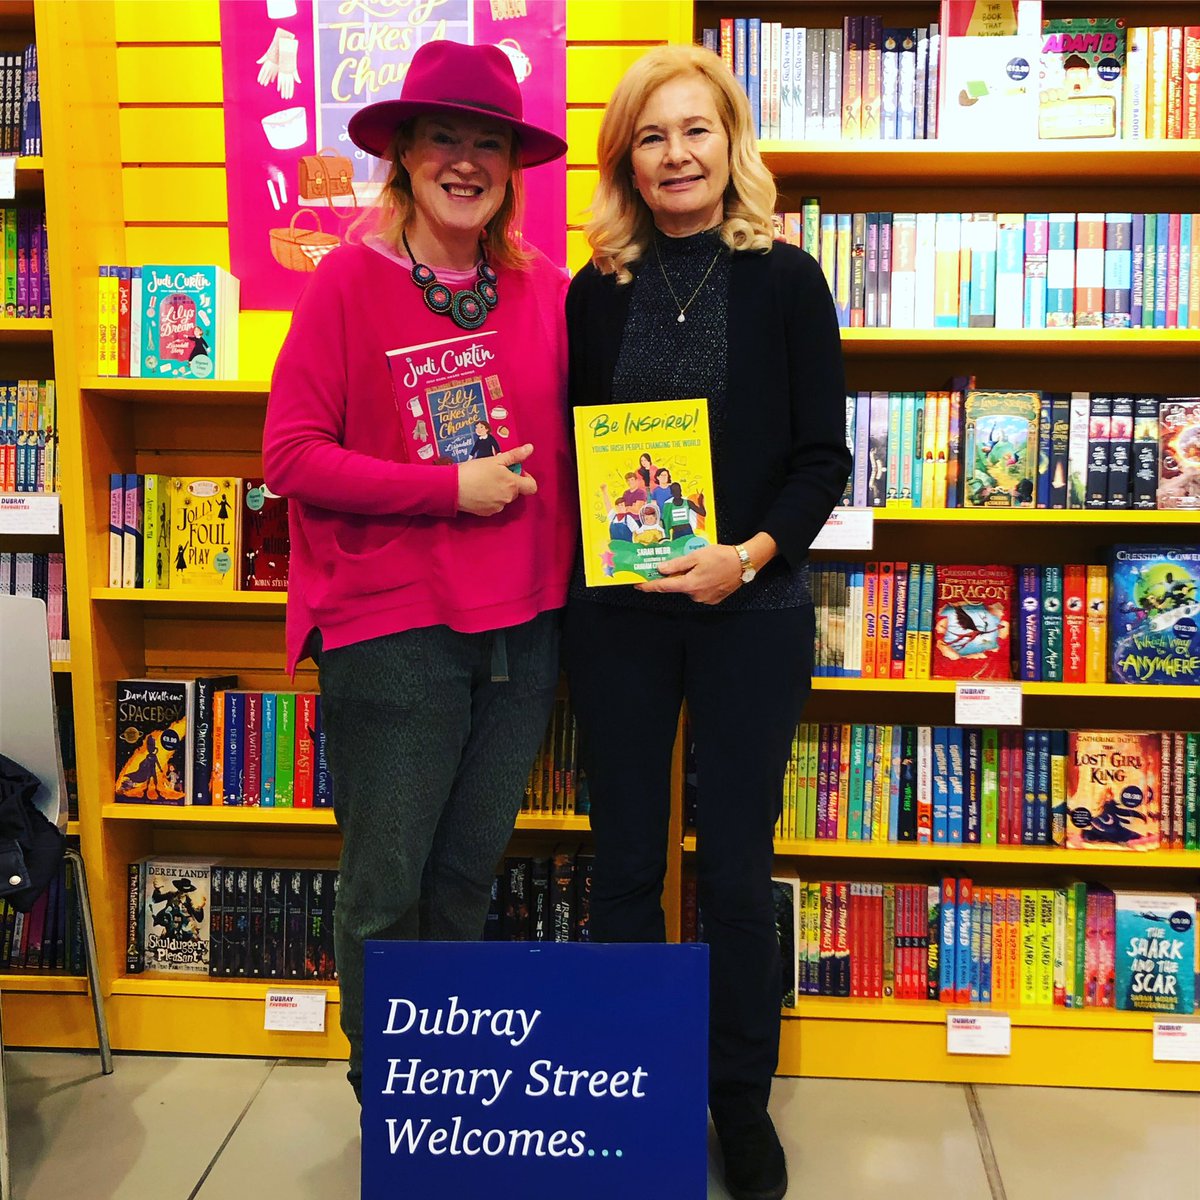 Spent time with my dear writer friend @judi_curtin yesterday. She was @DubrayBooks Henry Street for an event. Here we are proudly showing off our new books. Lily Takes a Chance is SO good. Matches my top too!